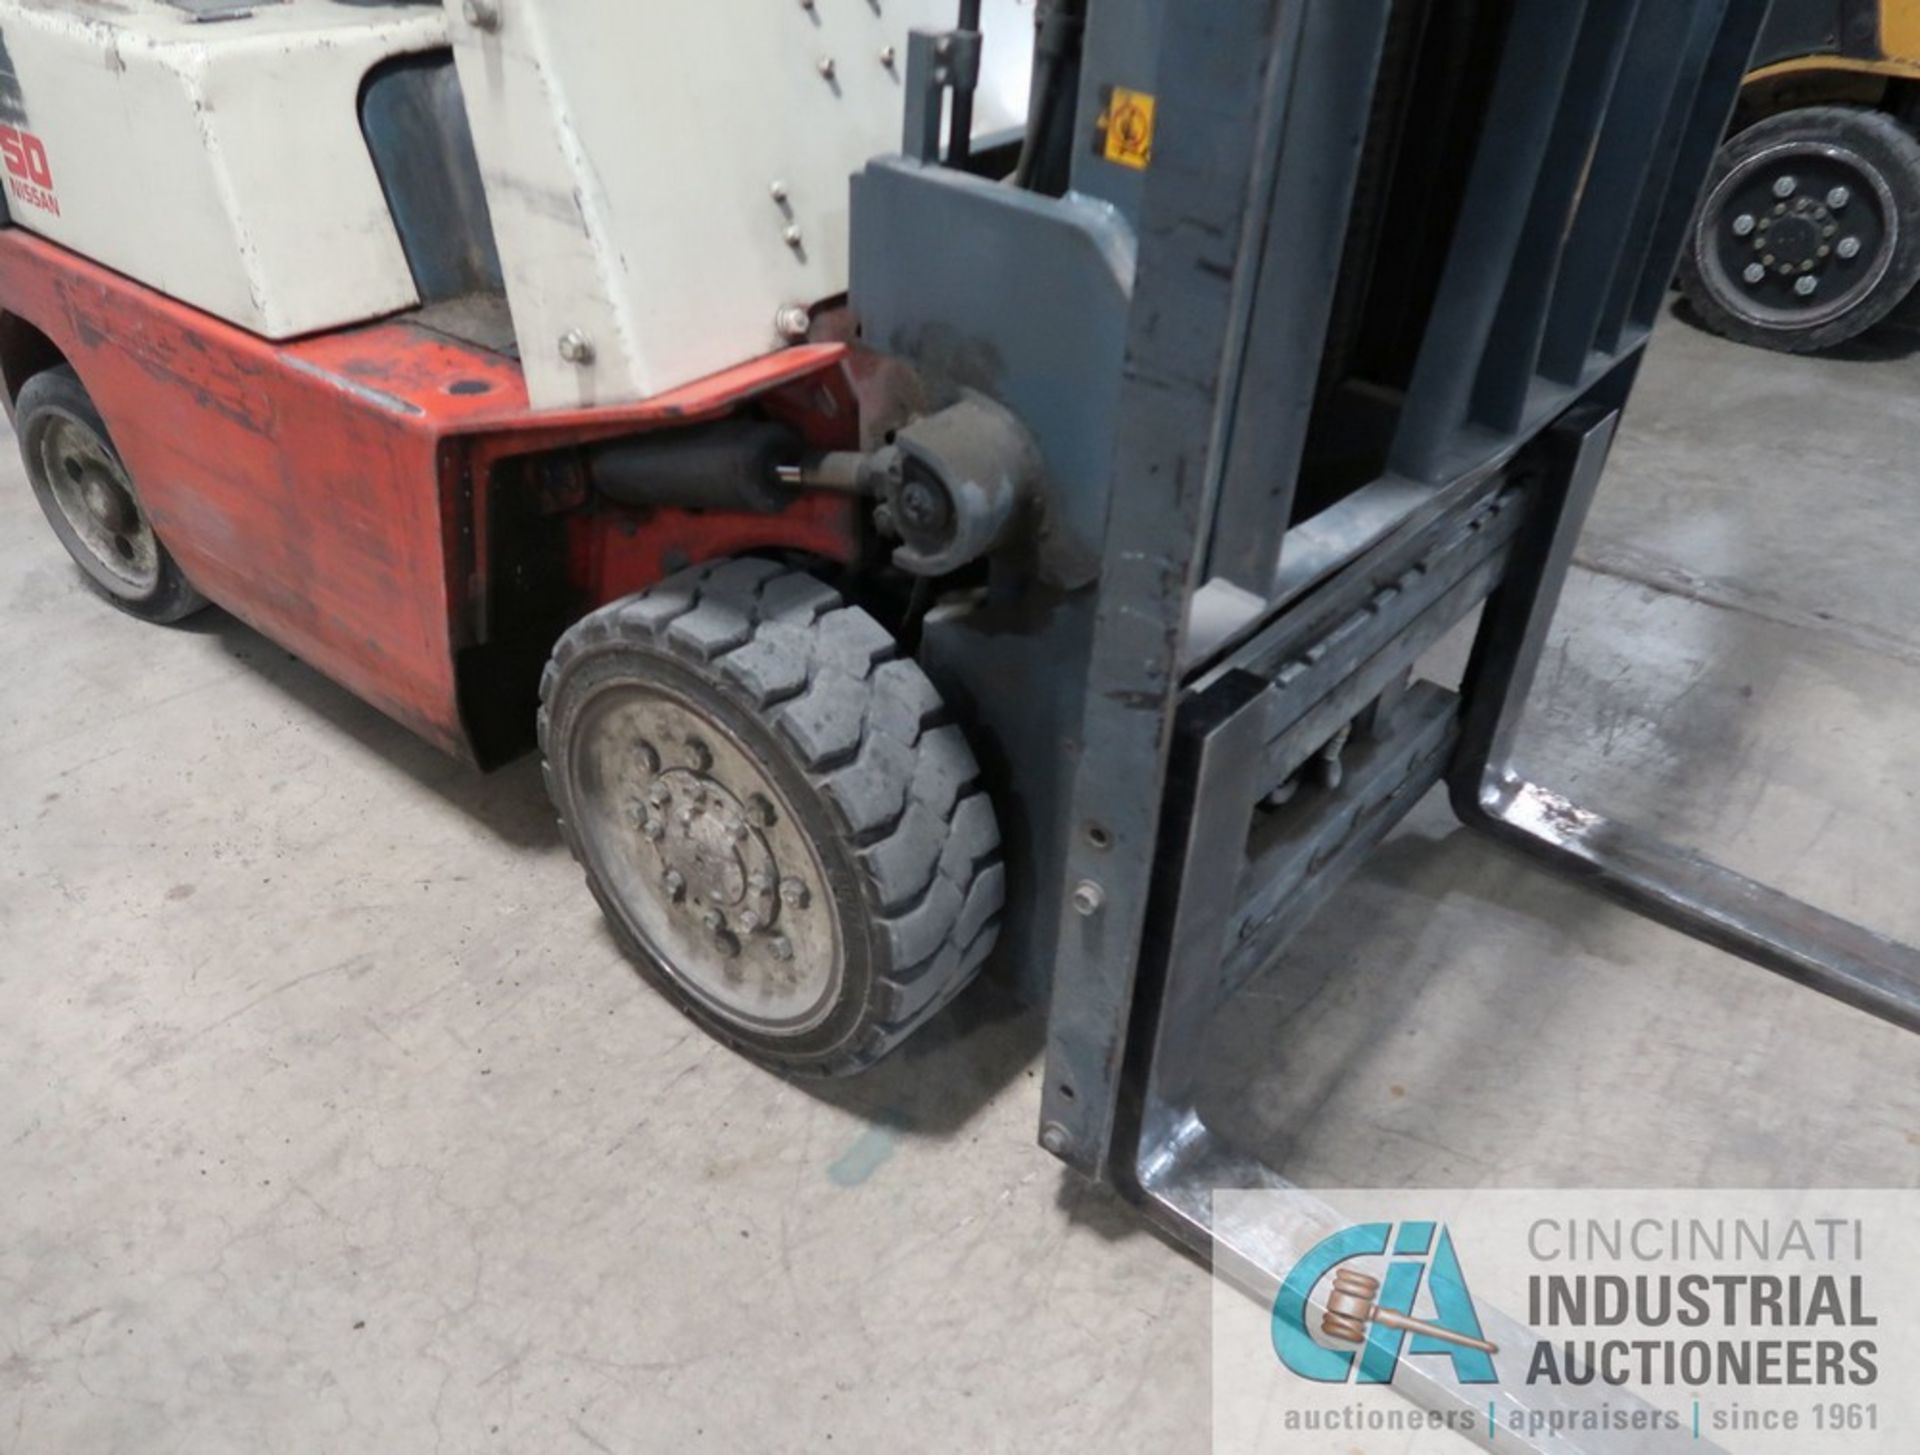 5,000 LB. NISSAN MODEL 50 LP GAS CUSHION TIRE THREE STAGE MAST FORKLIFT; S/N CPJ02A25PV, 178" MAX - Image 5 of 11